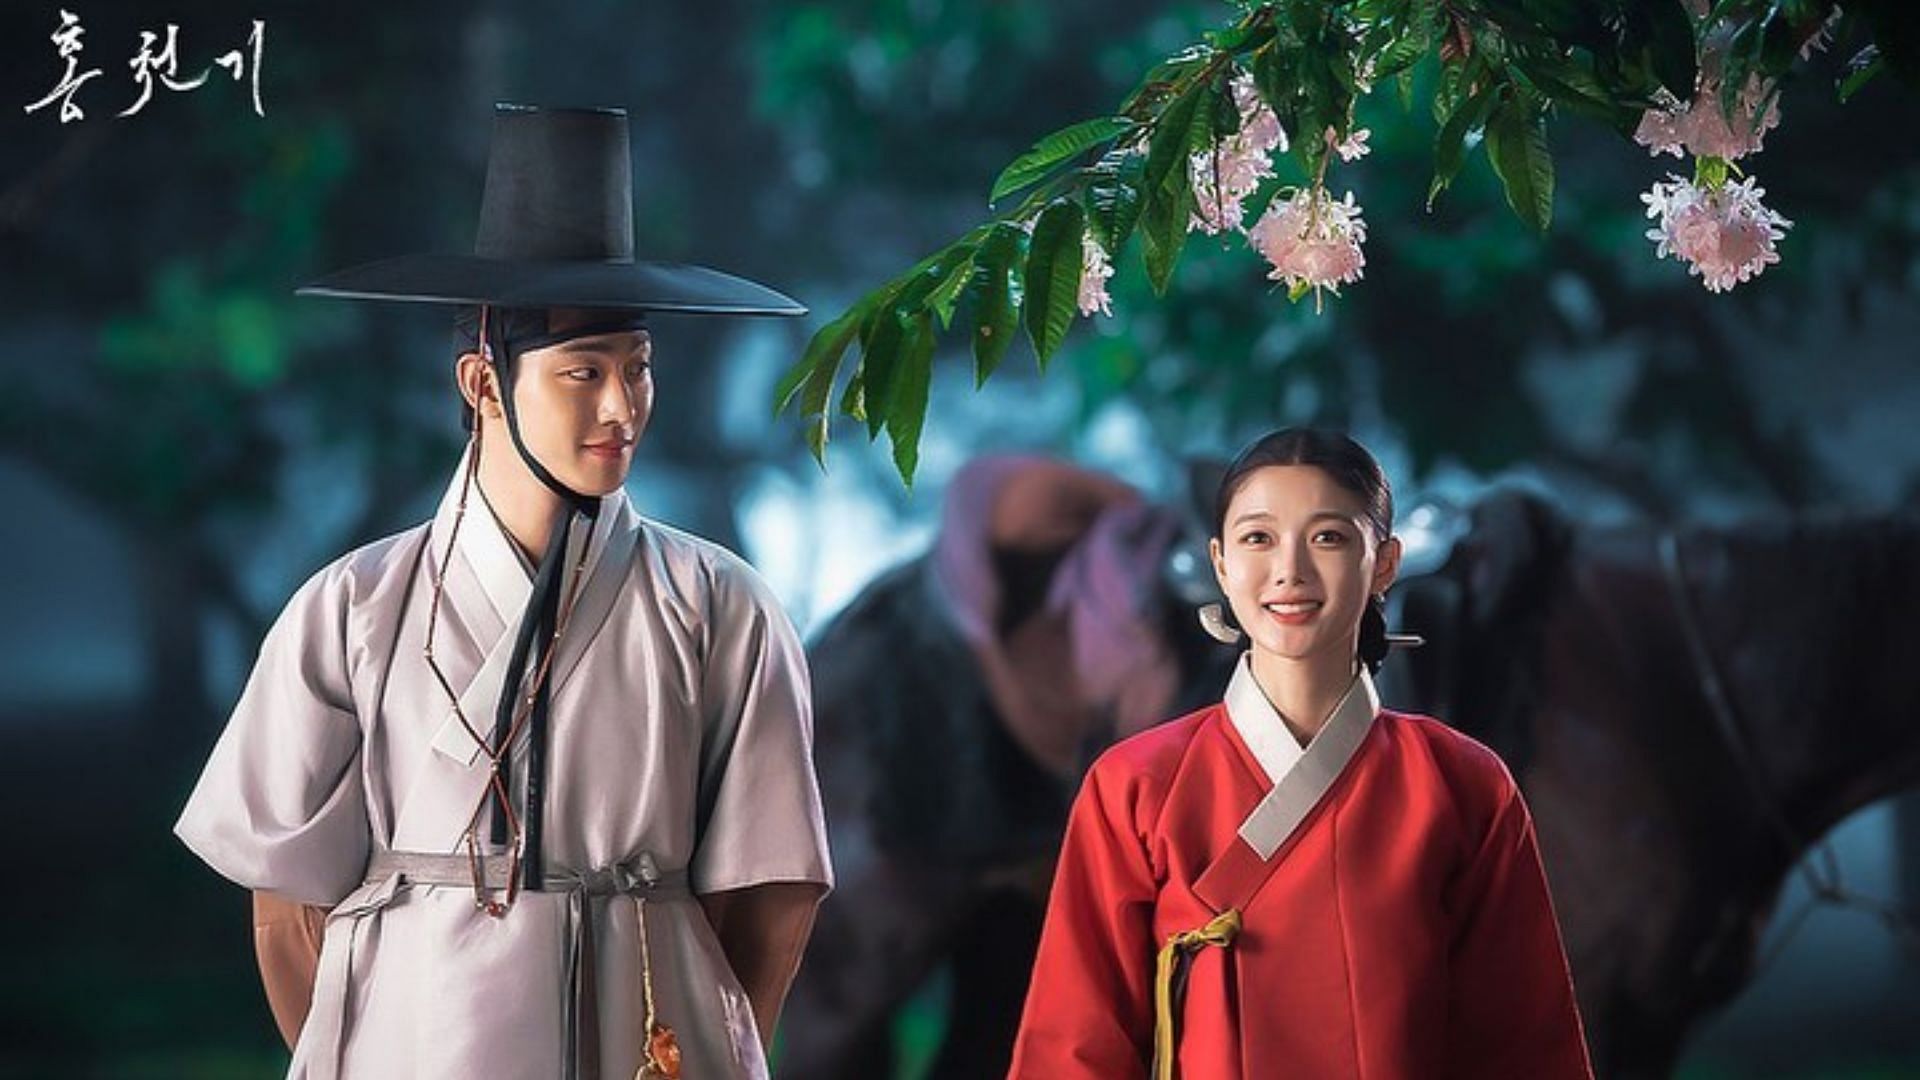 Lovers Of The Red Sky Ending Explained: Ha Ram And Cheong Gi Get Their Happy Ending, But Here's Why Season 2 Is Necessary